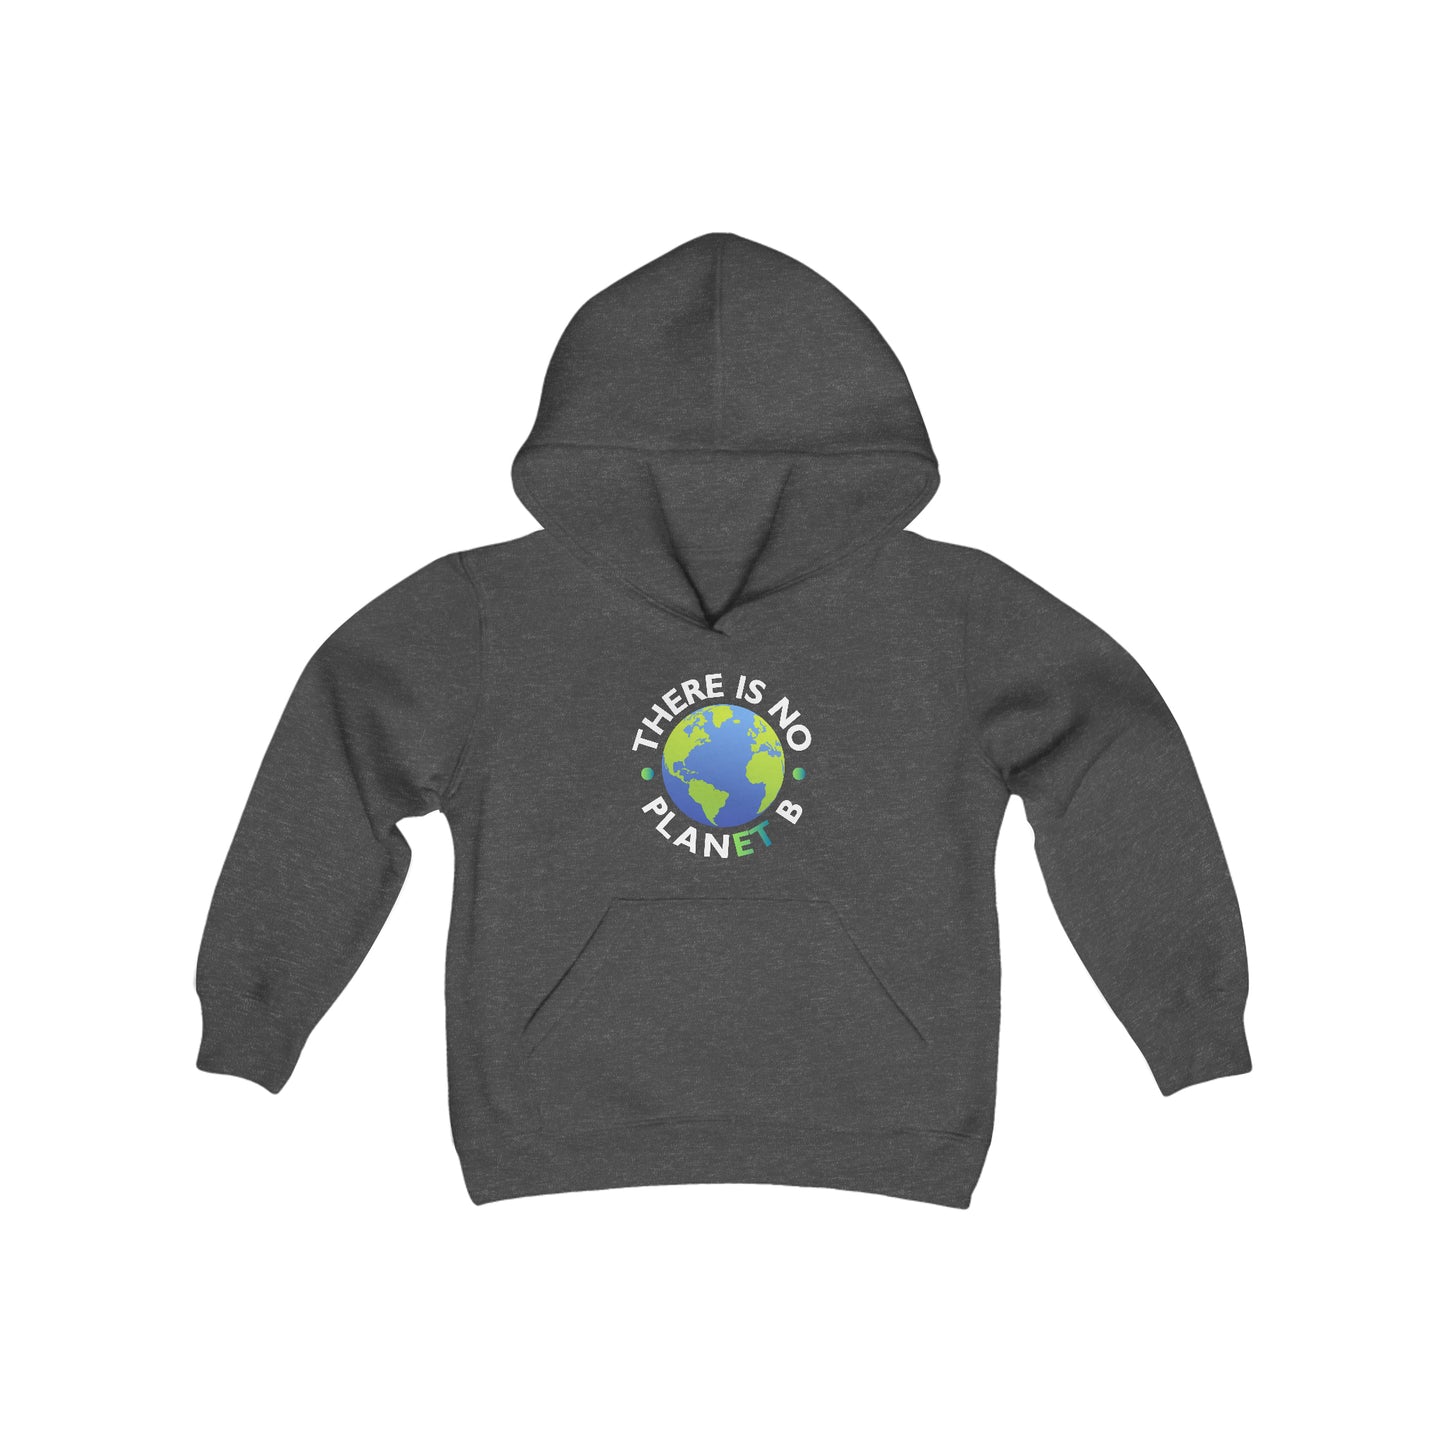 “There Is No Planet B” Youth Hoodie